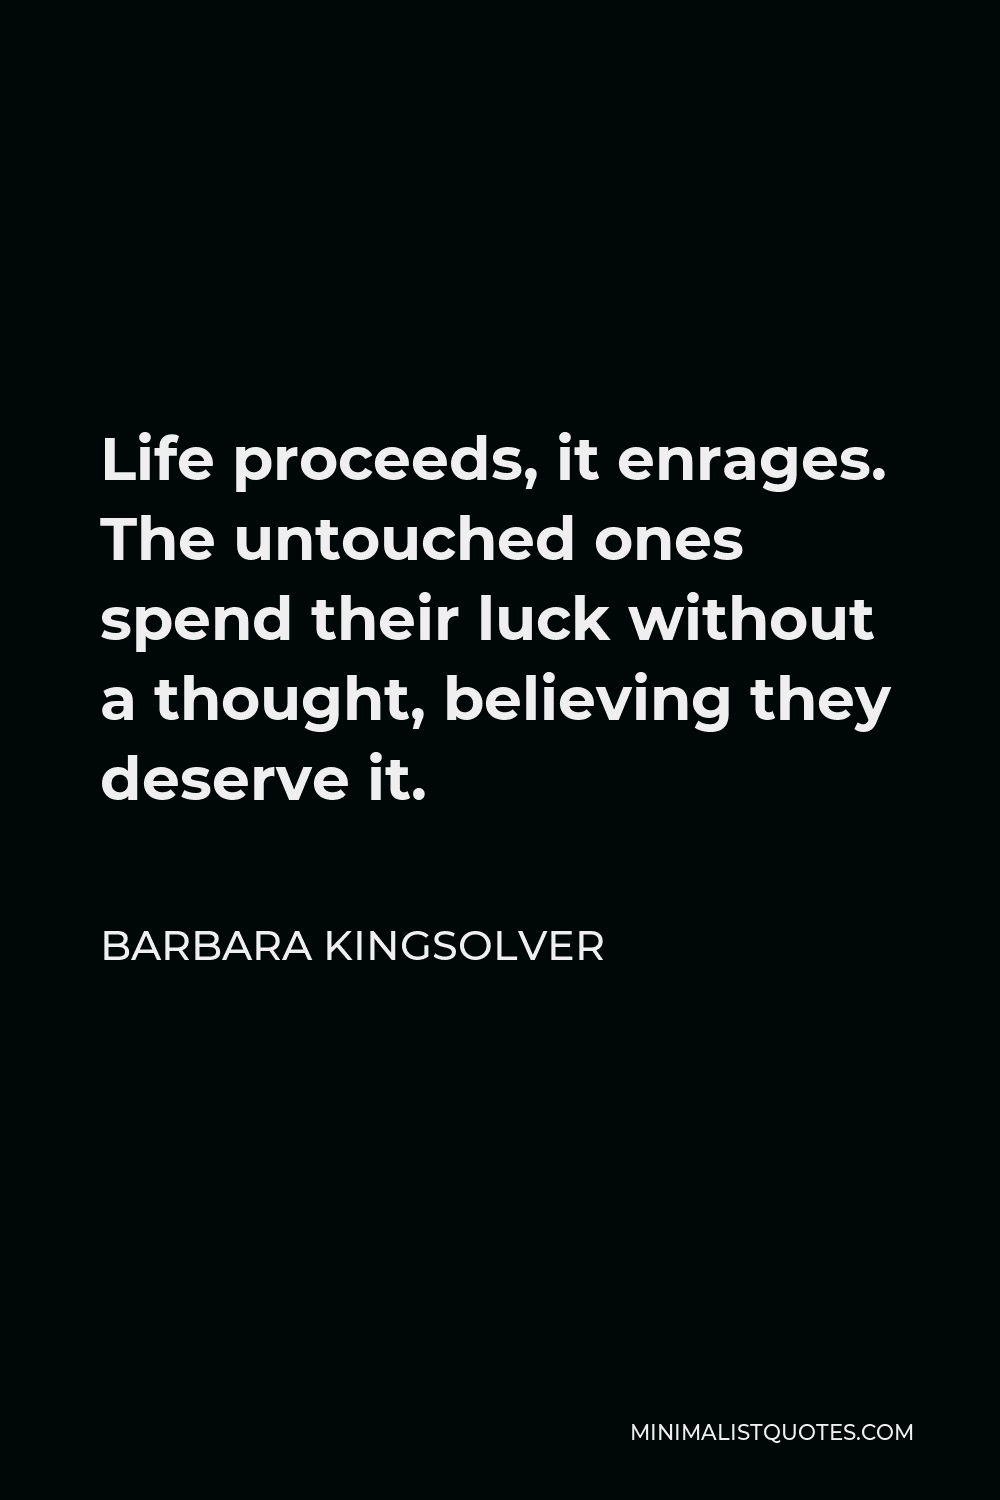 Barbara Kingsolver Quote - Life proceeds, it enrages. The untouched ones spend their luck without a thought, believing they deserve it.